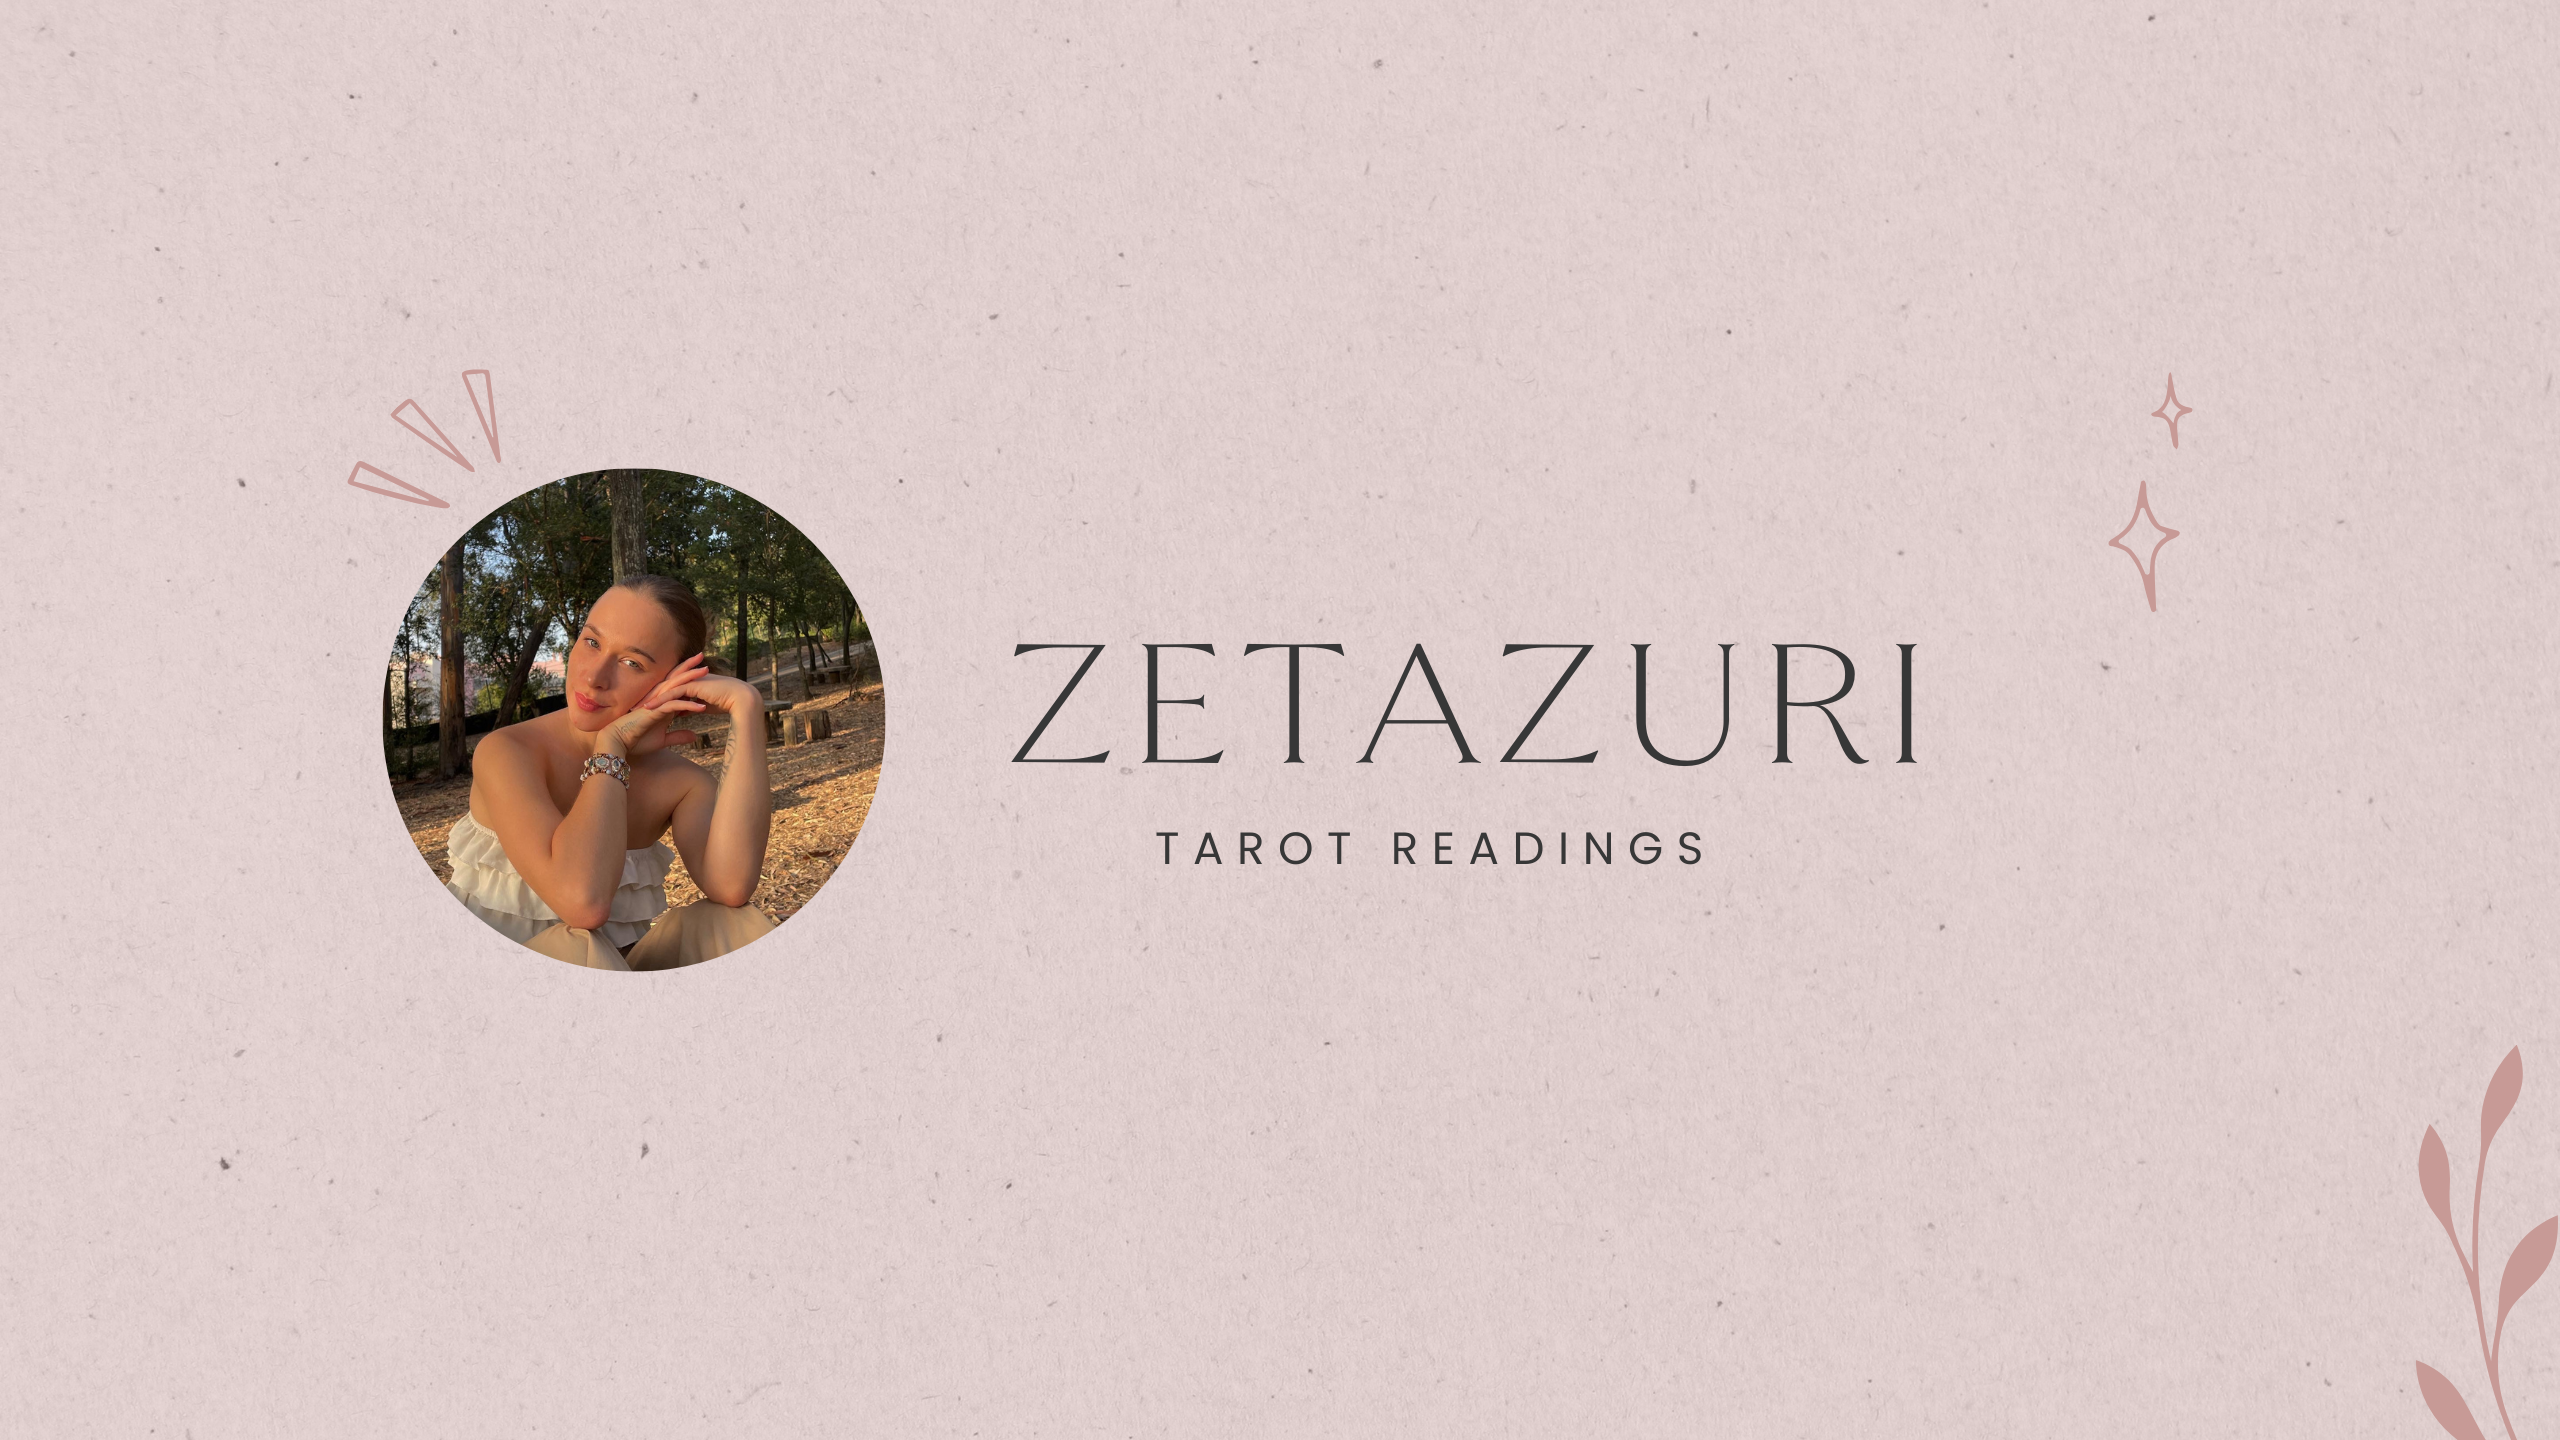 Load video: Here I post Zodiac readings weekly, check it out!